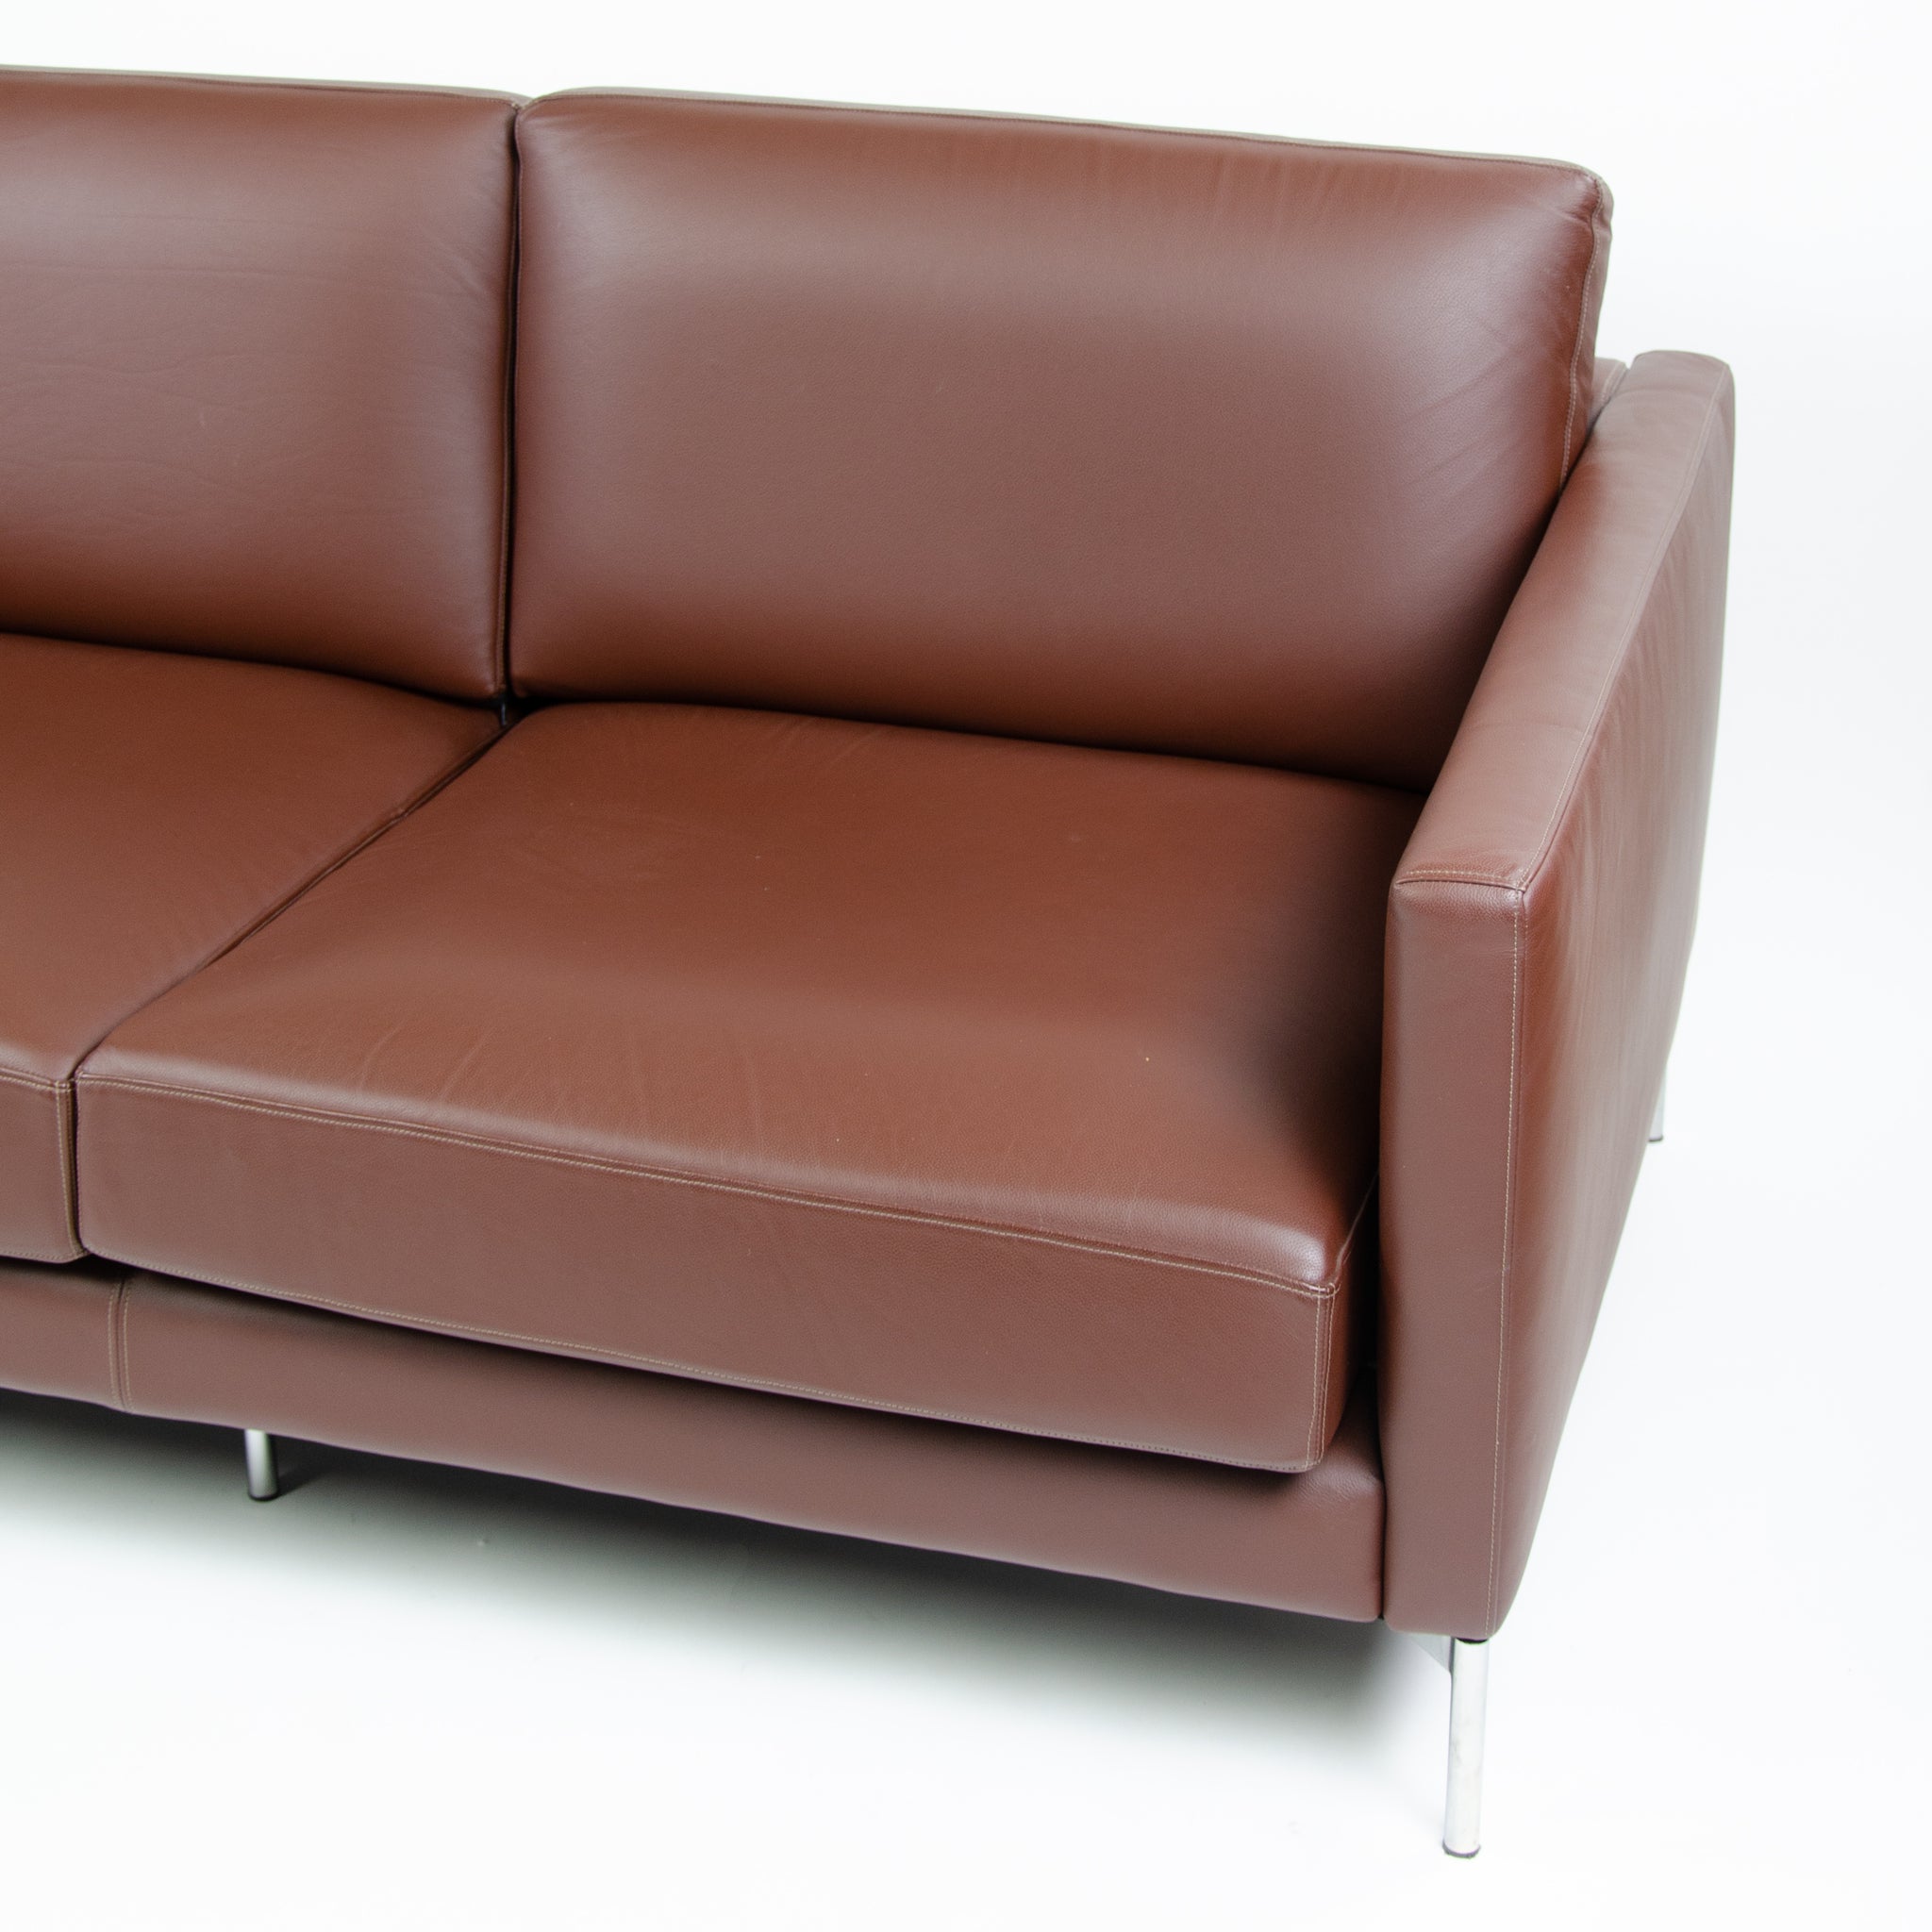 SOLD Knoll International Divina Settee by Piero Lissoni MINT! Brown Leather